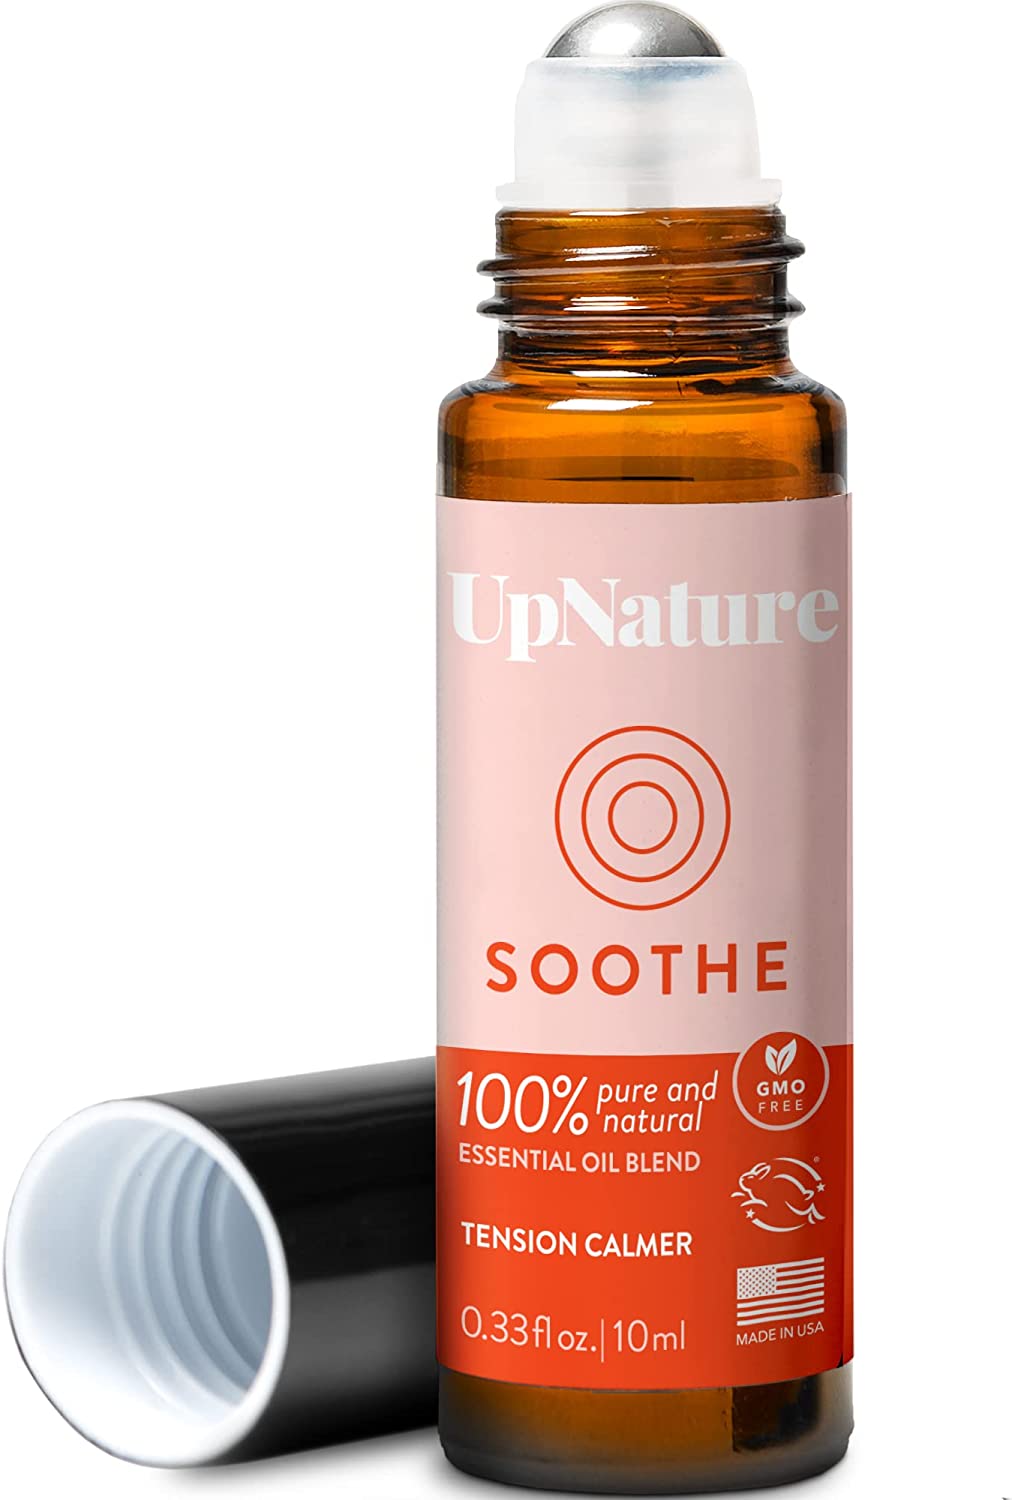 Soothe Essential Oil Roll On Blend- Reduce Muscle & Pain